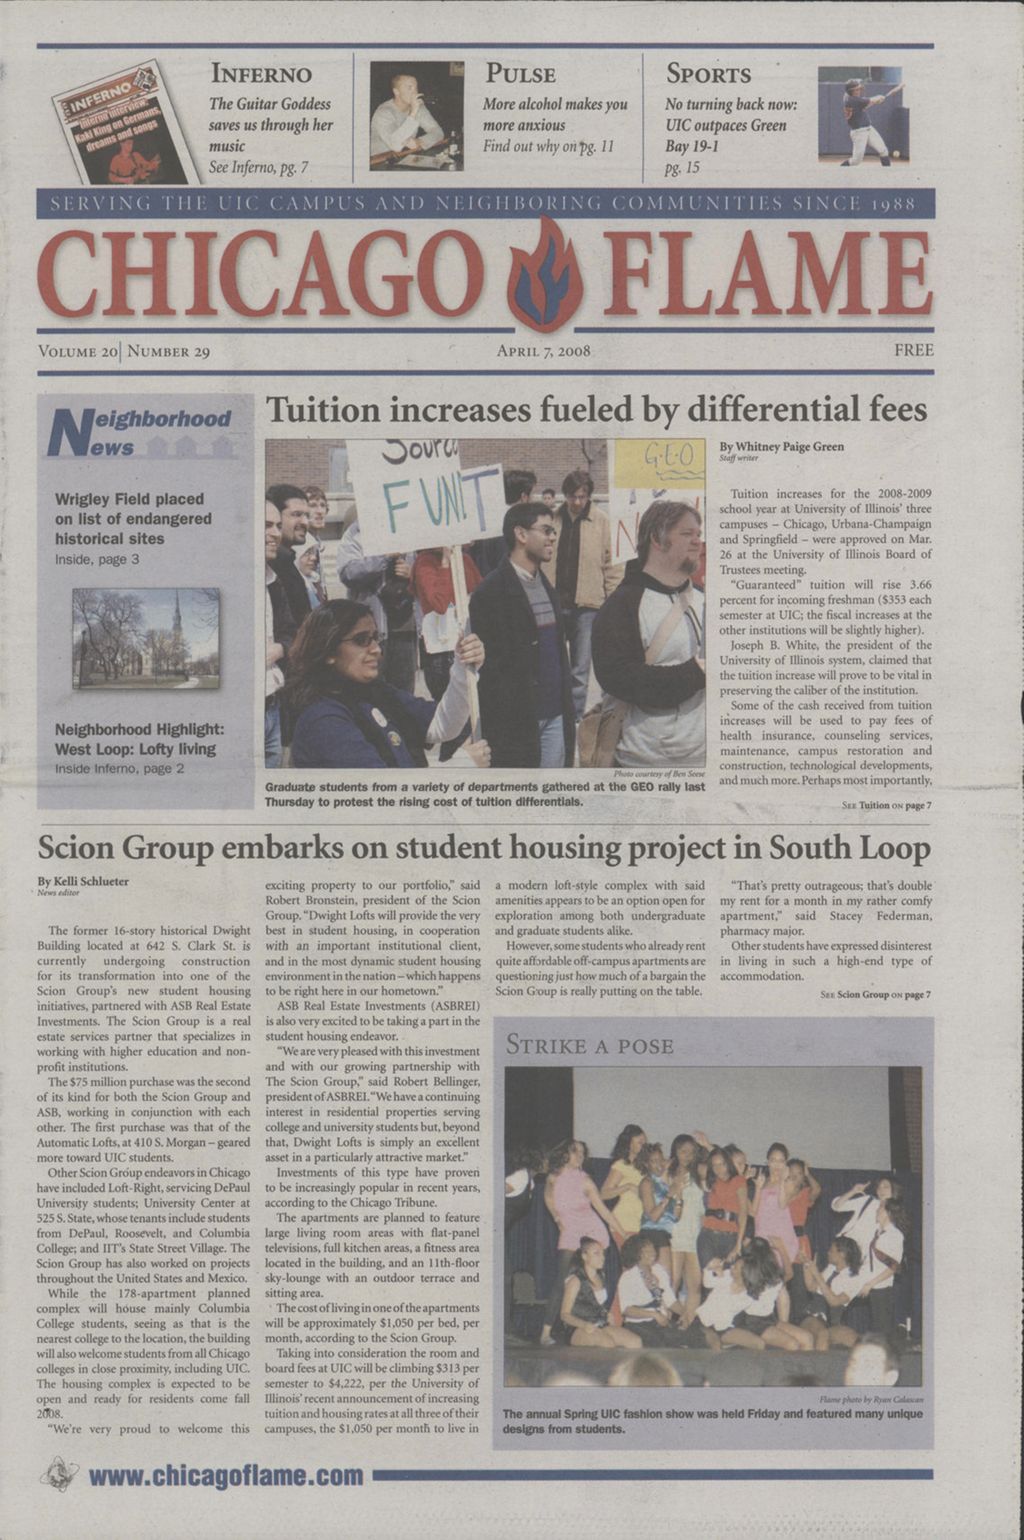 Miniature of Chicago Flame (April 7, 2008)